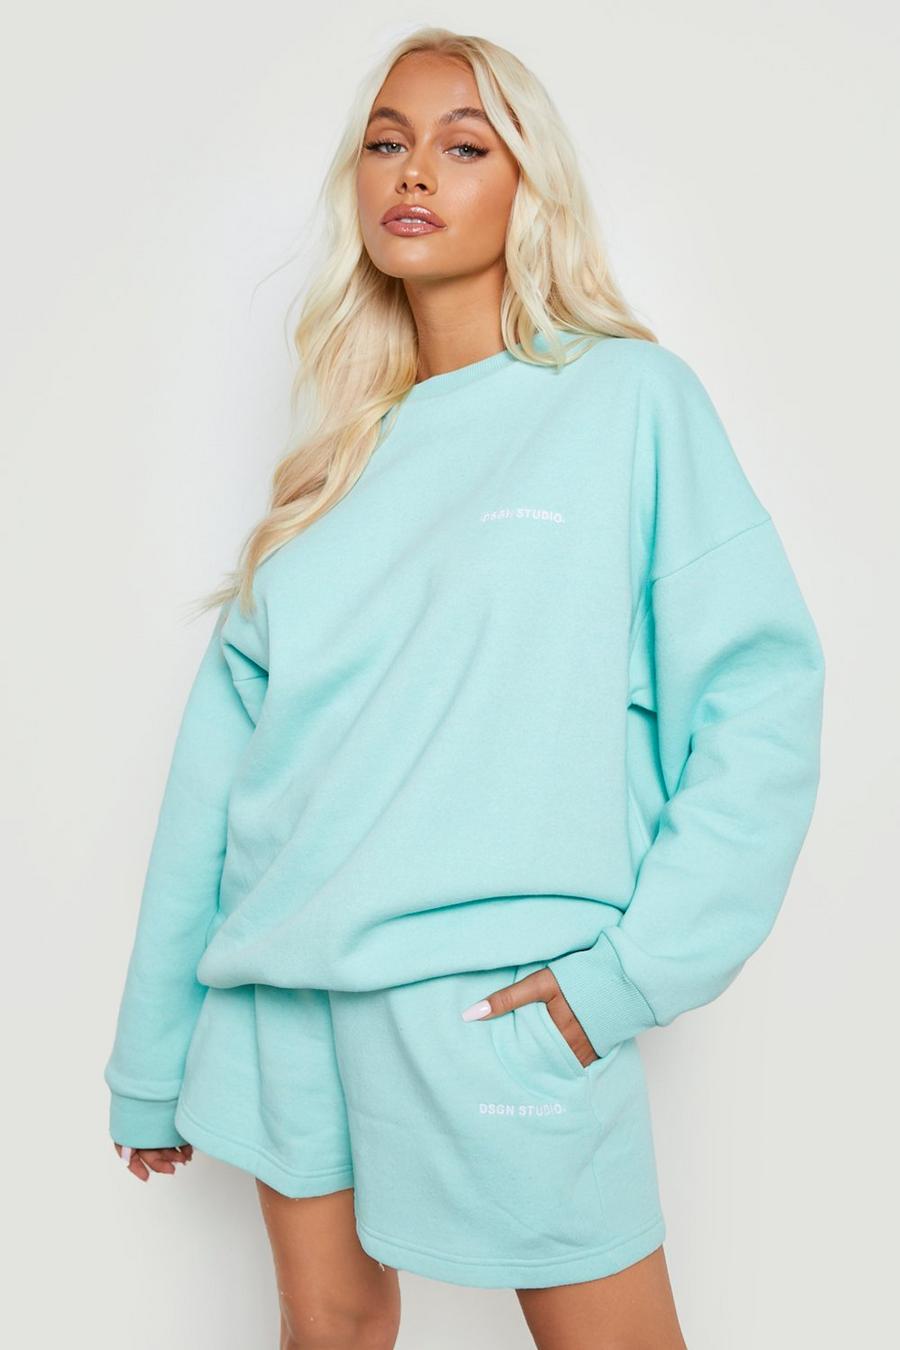 Dsgn Studio Embroidered Short Tracksuit | boohoo